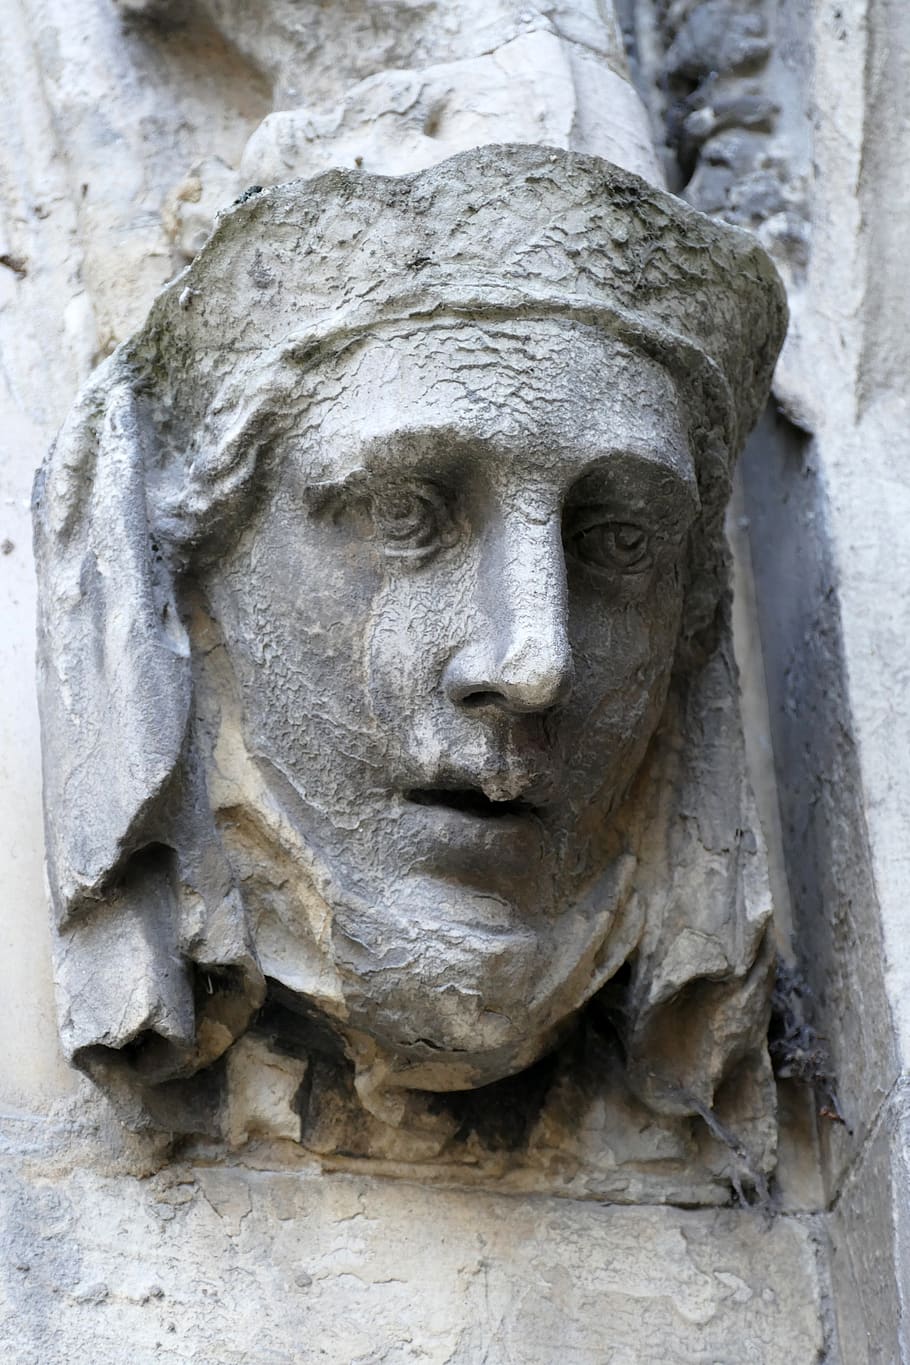 head, face, sculpture, stone, art, old, antique, history, church, religion